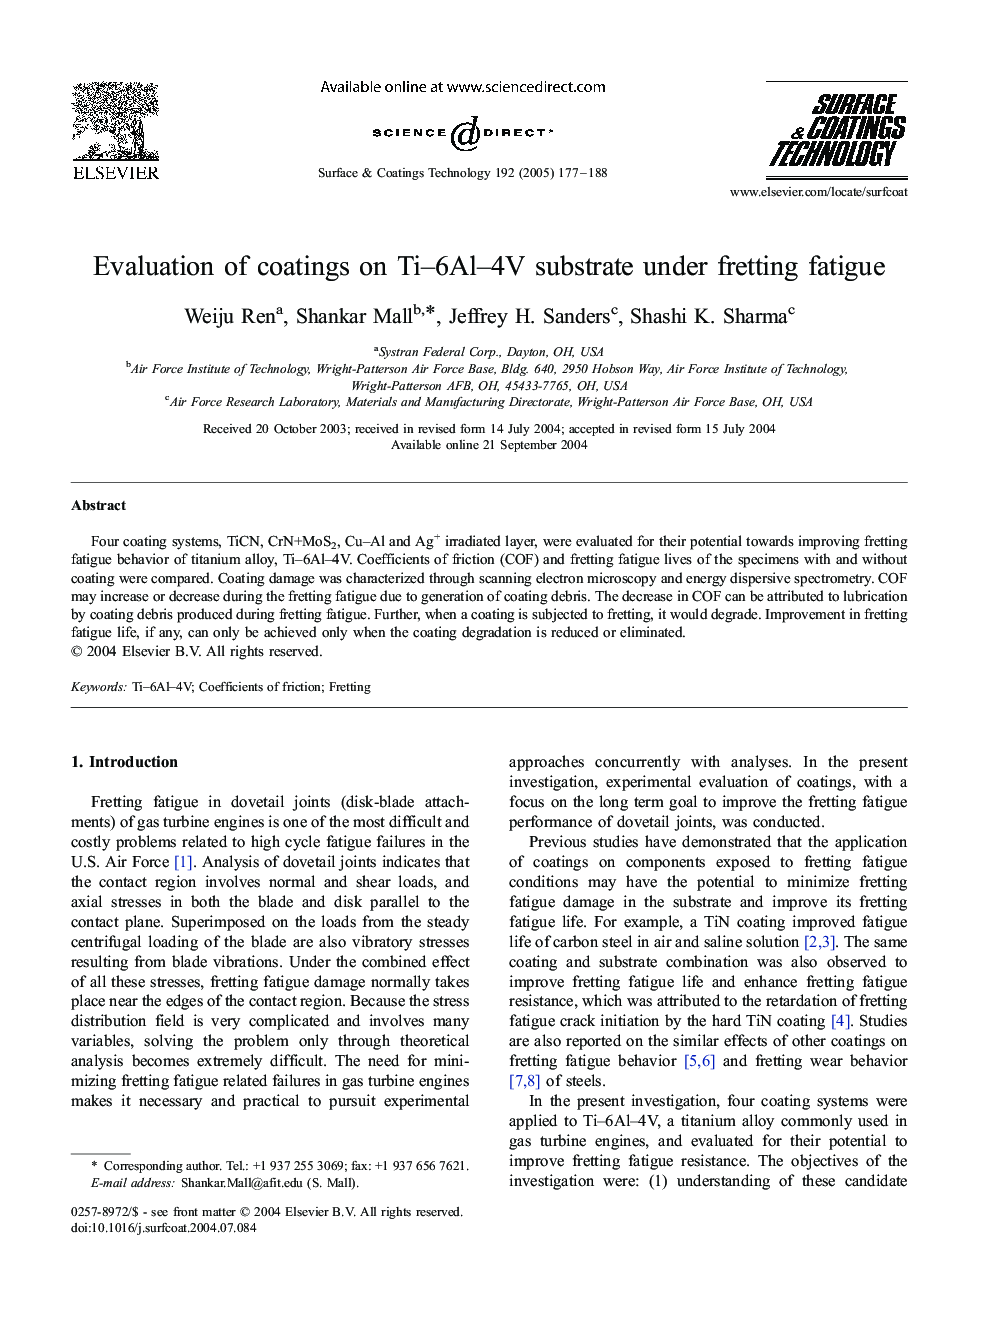 Evaluation of coatings on Ti-6Al-4V substrate under fretting fatigue